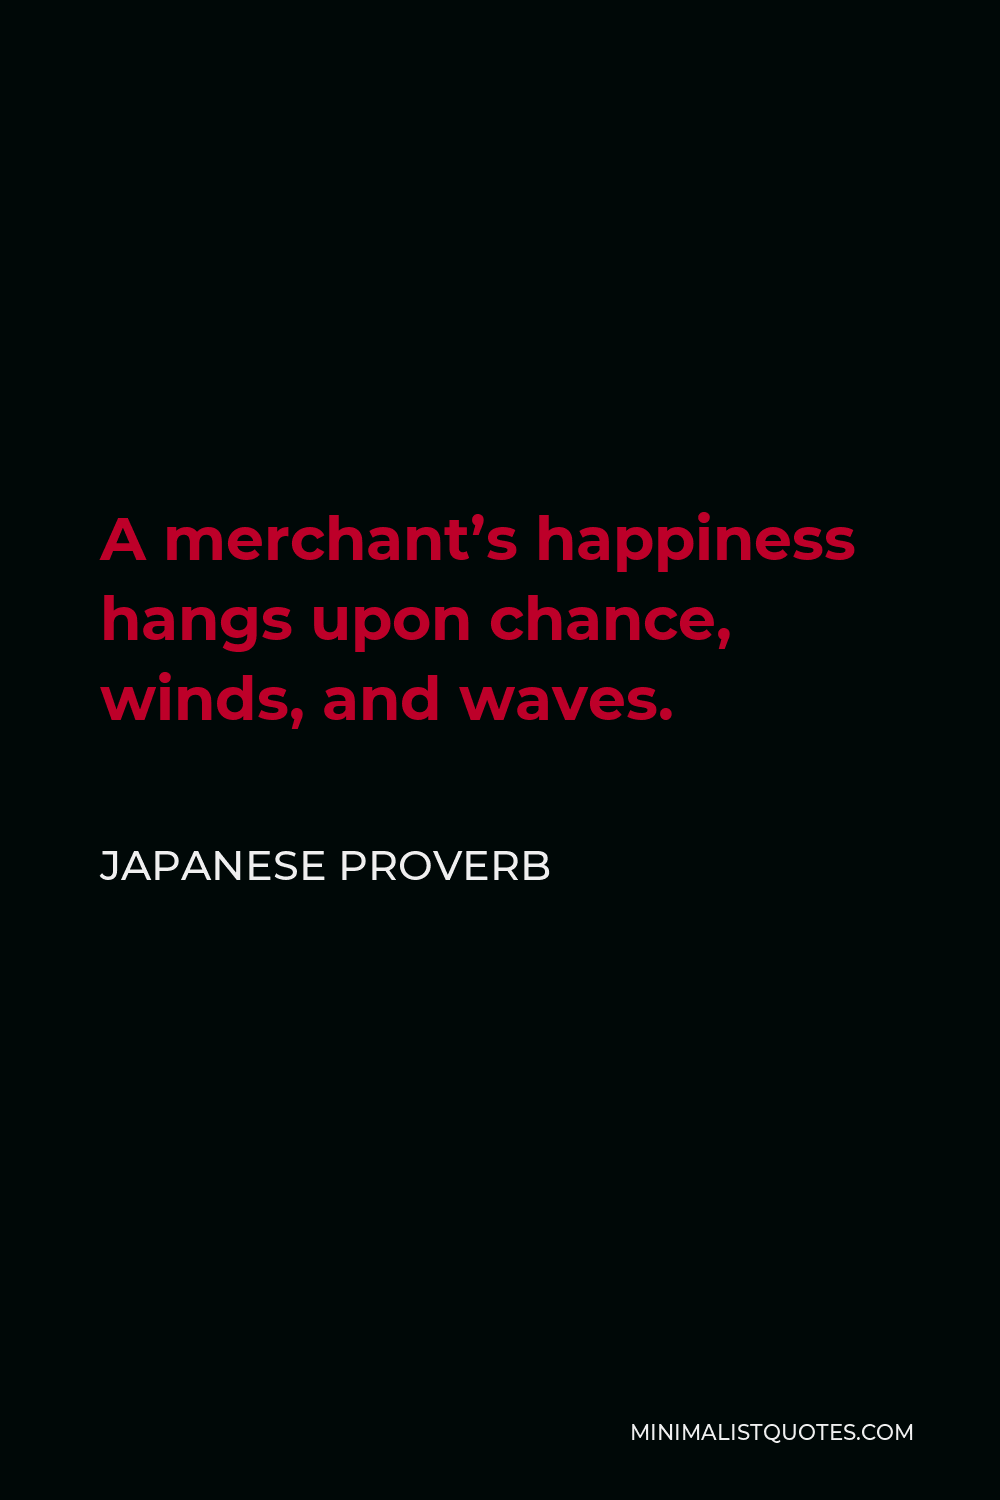 Japanese Proverb Quote - A merchant’s happiness hangs upon chance, winds, and waves.